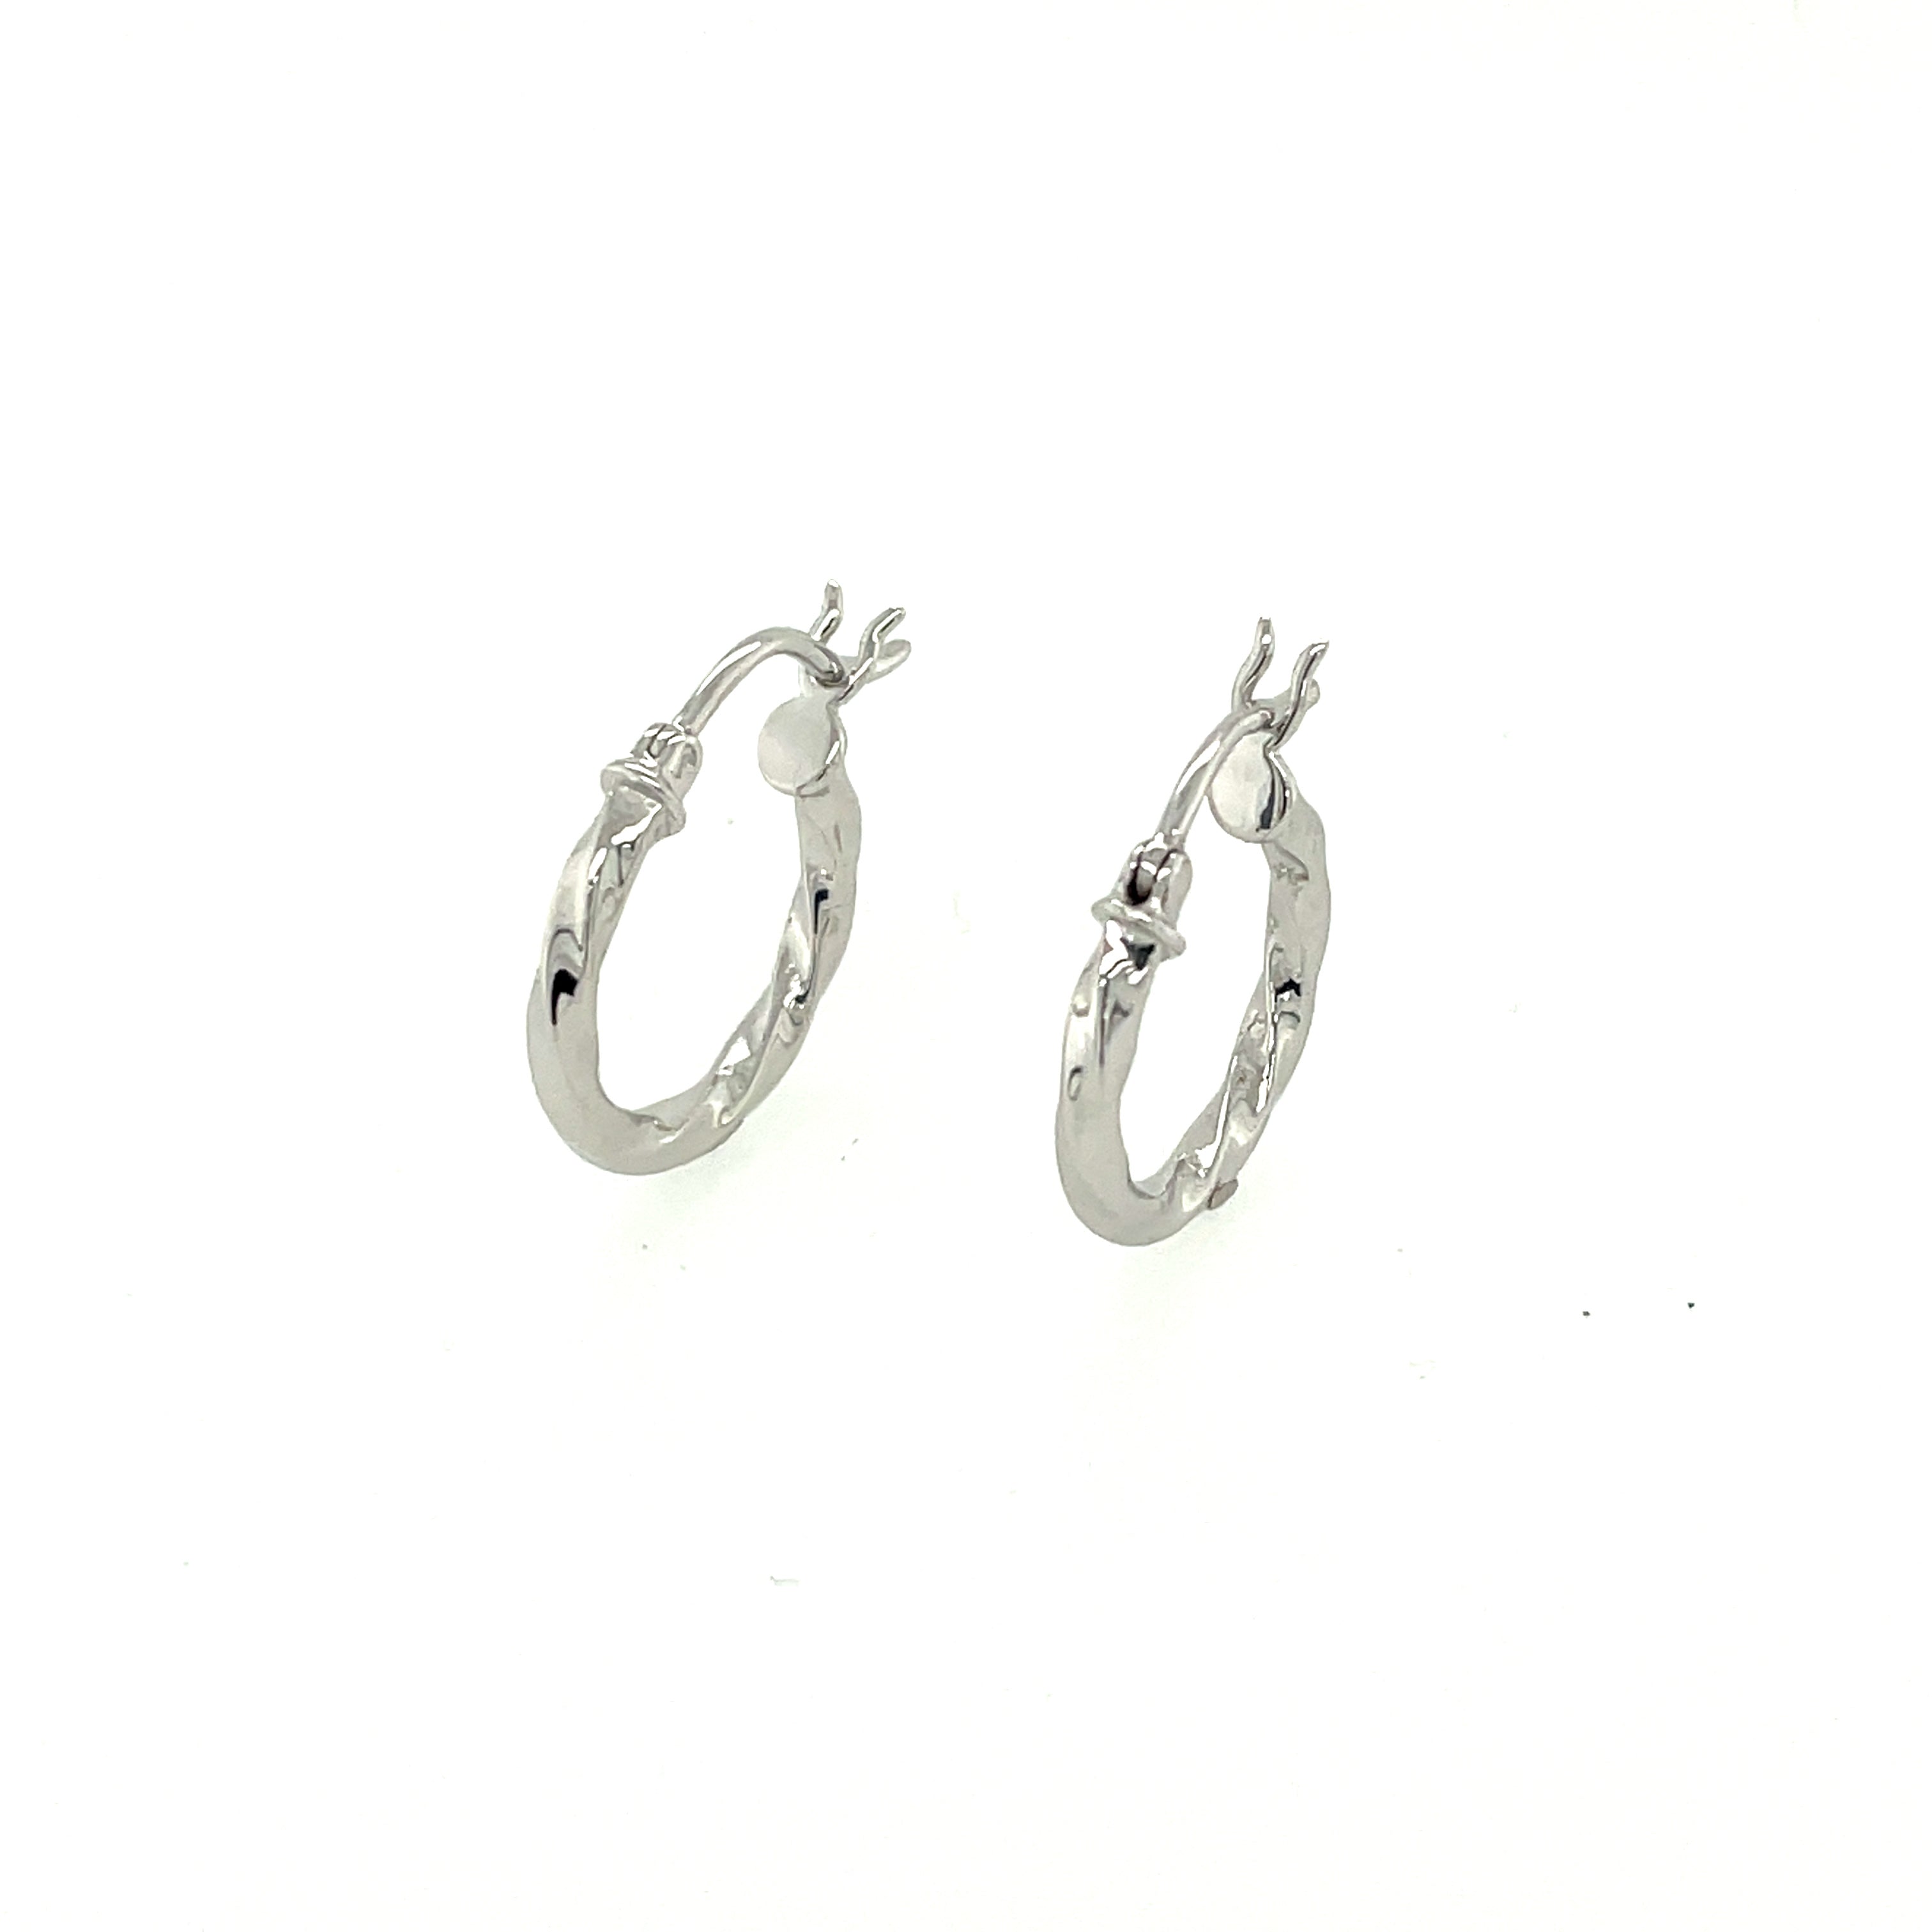 Silver Hoop Earrings - MJ021 - Hallmark Jewellers Formby & The Jewellers Bench Widnes